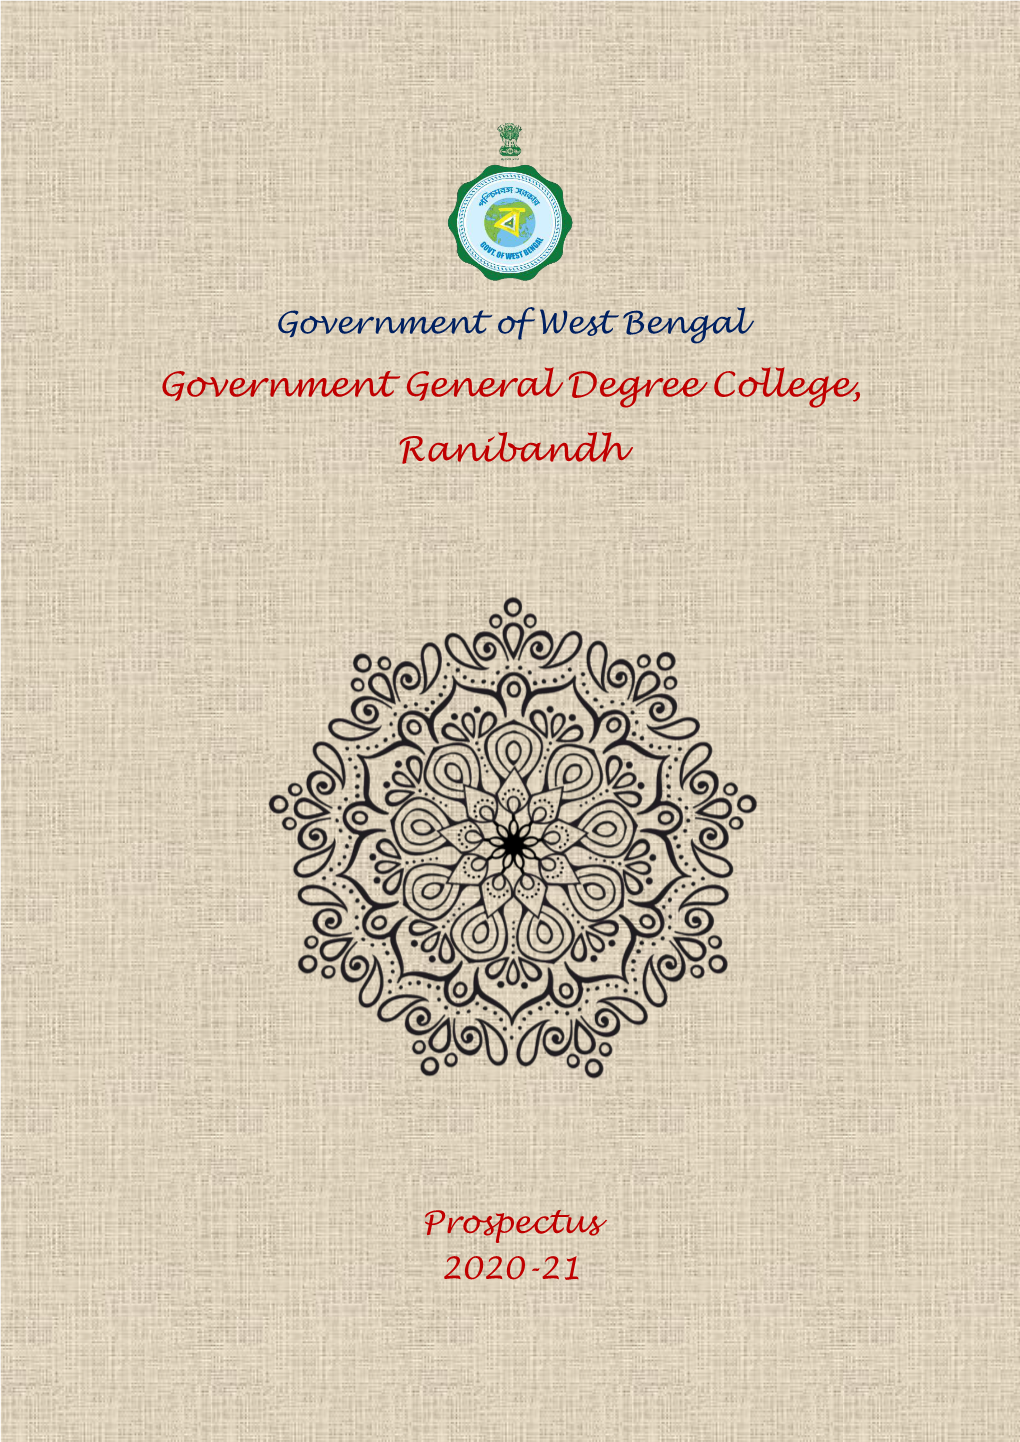 Government General Degree College, Ranibandh